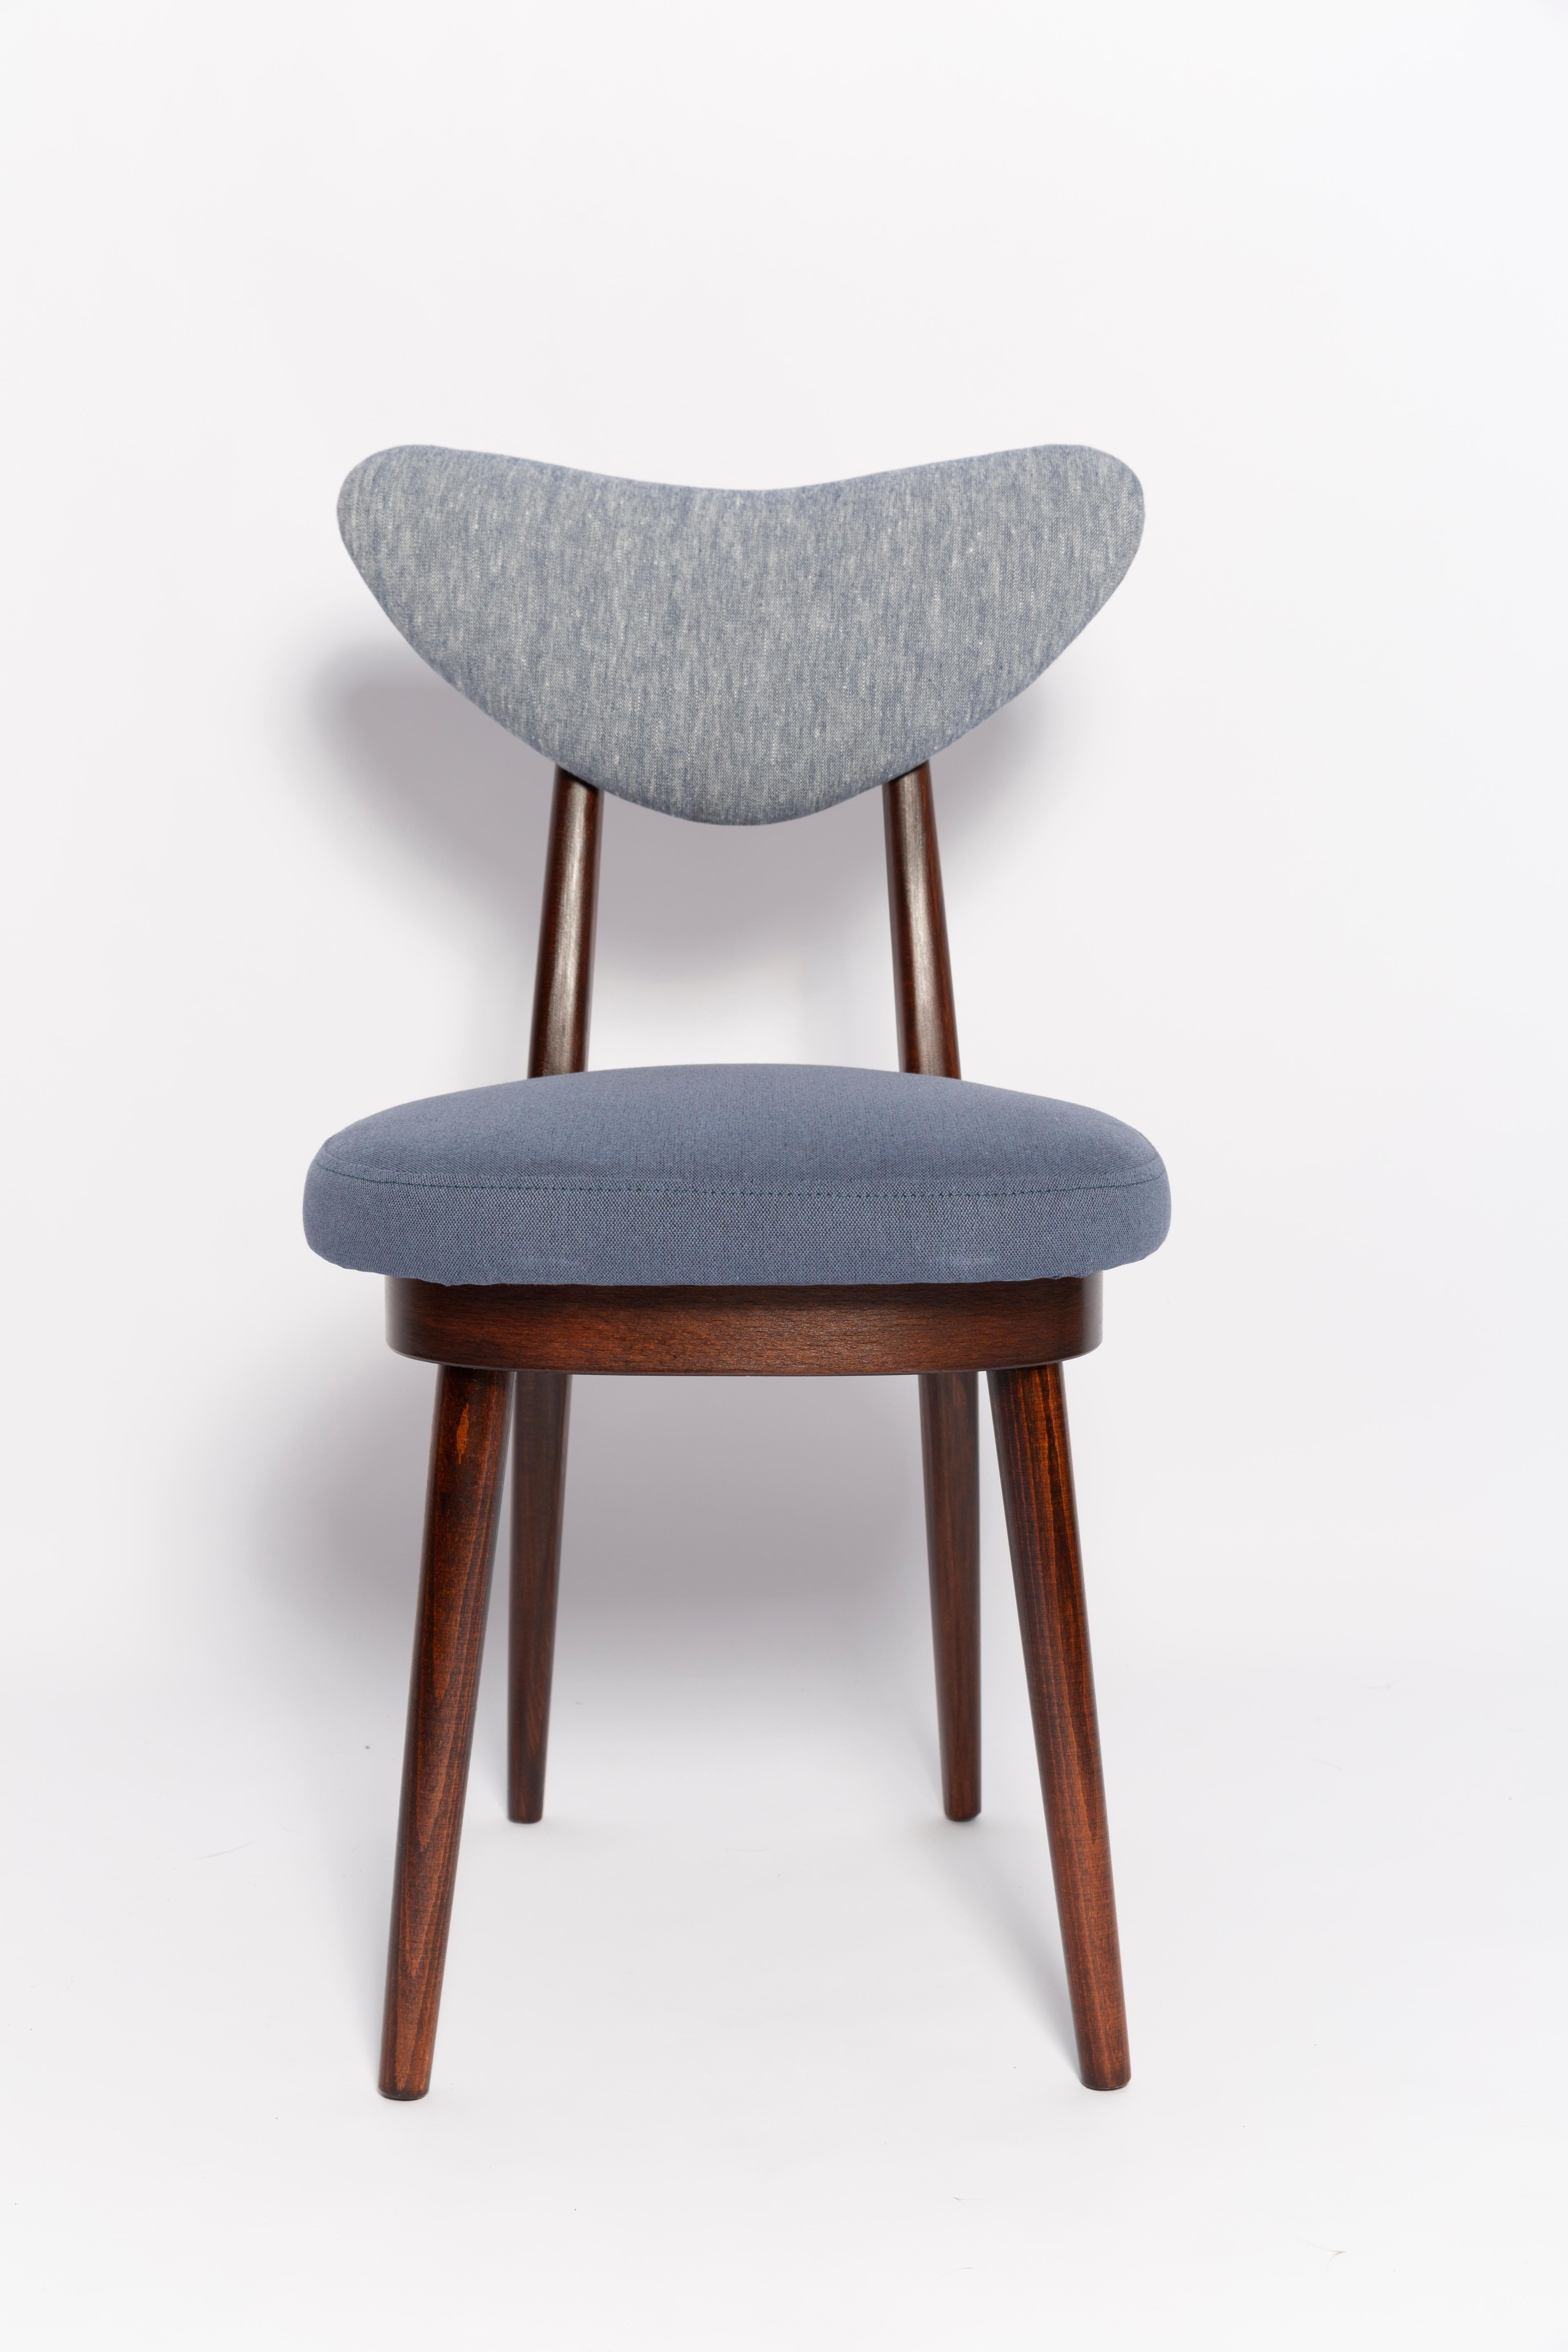 Set of Four Midcentury Light and Medium Blue Denim Heart Chairs, Europe, 1960s For Sale 2